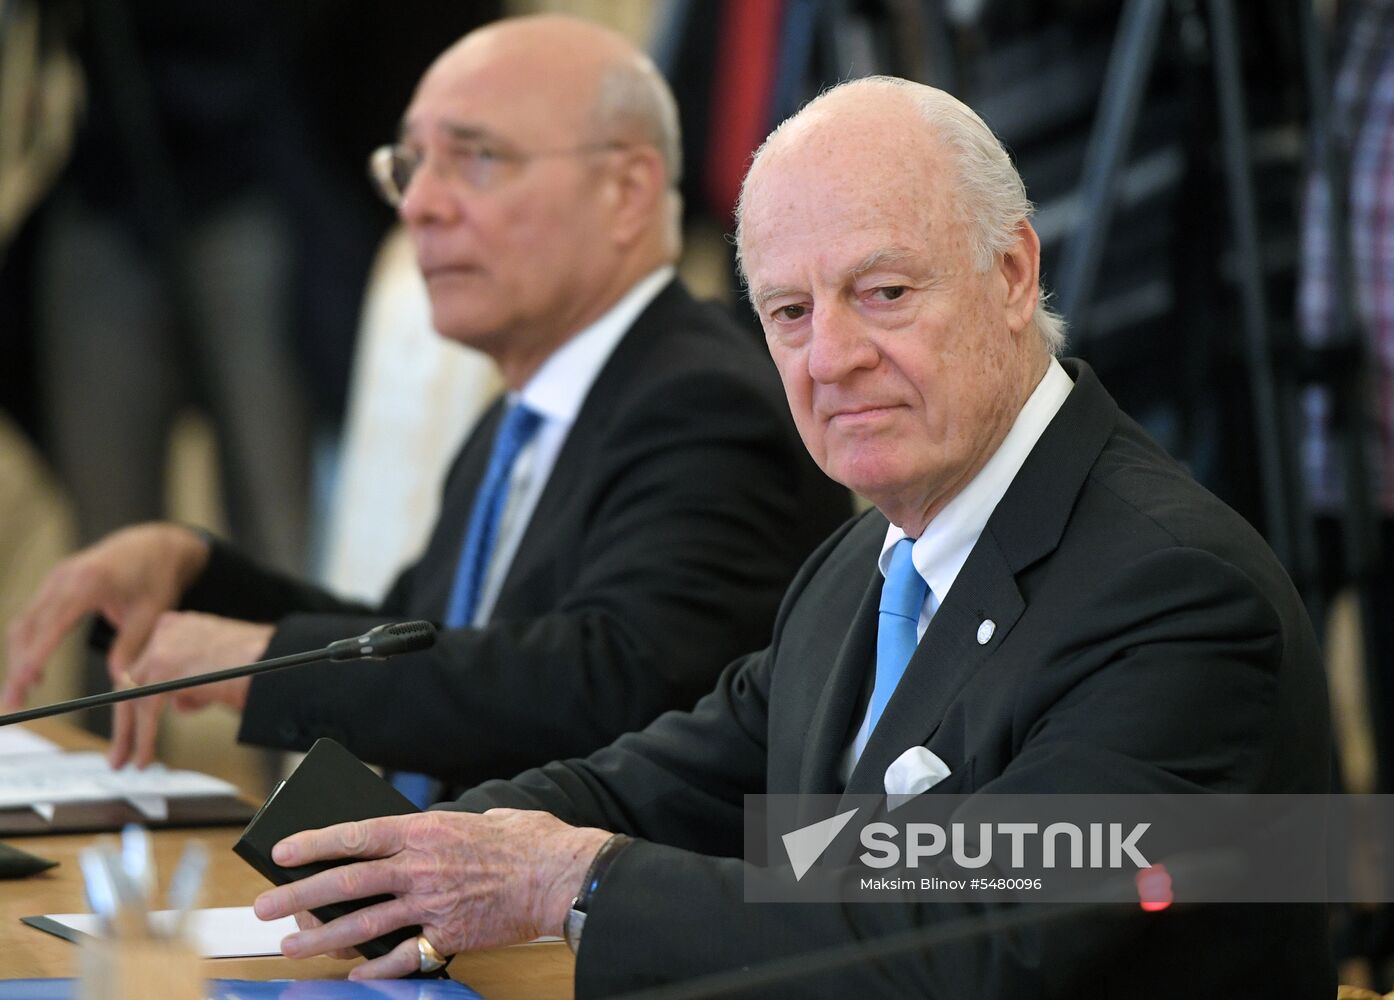 Russian Foreign Minister Sergei Lavrov meets with UN's Special Envoy for Syria Staffan de Mistura